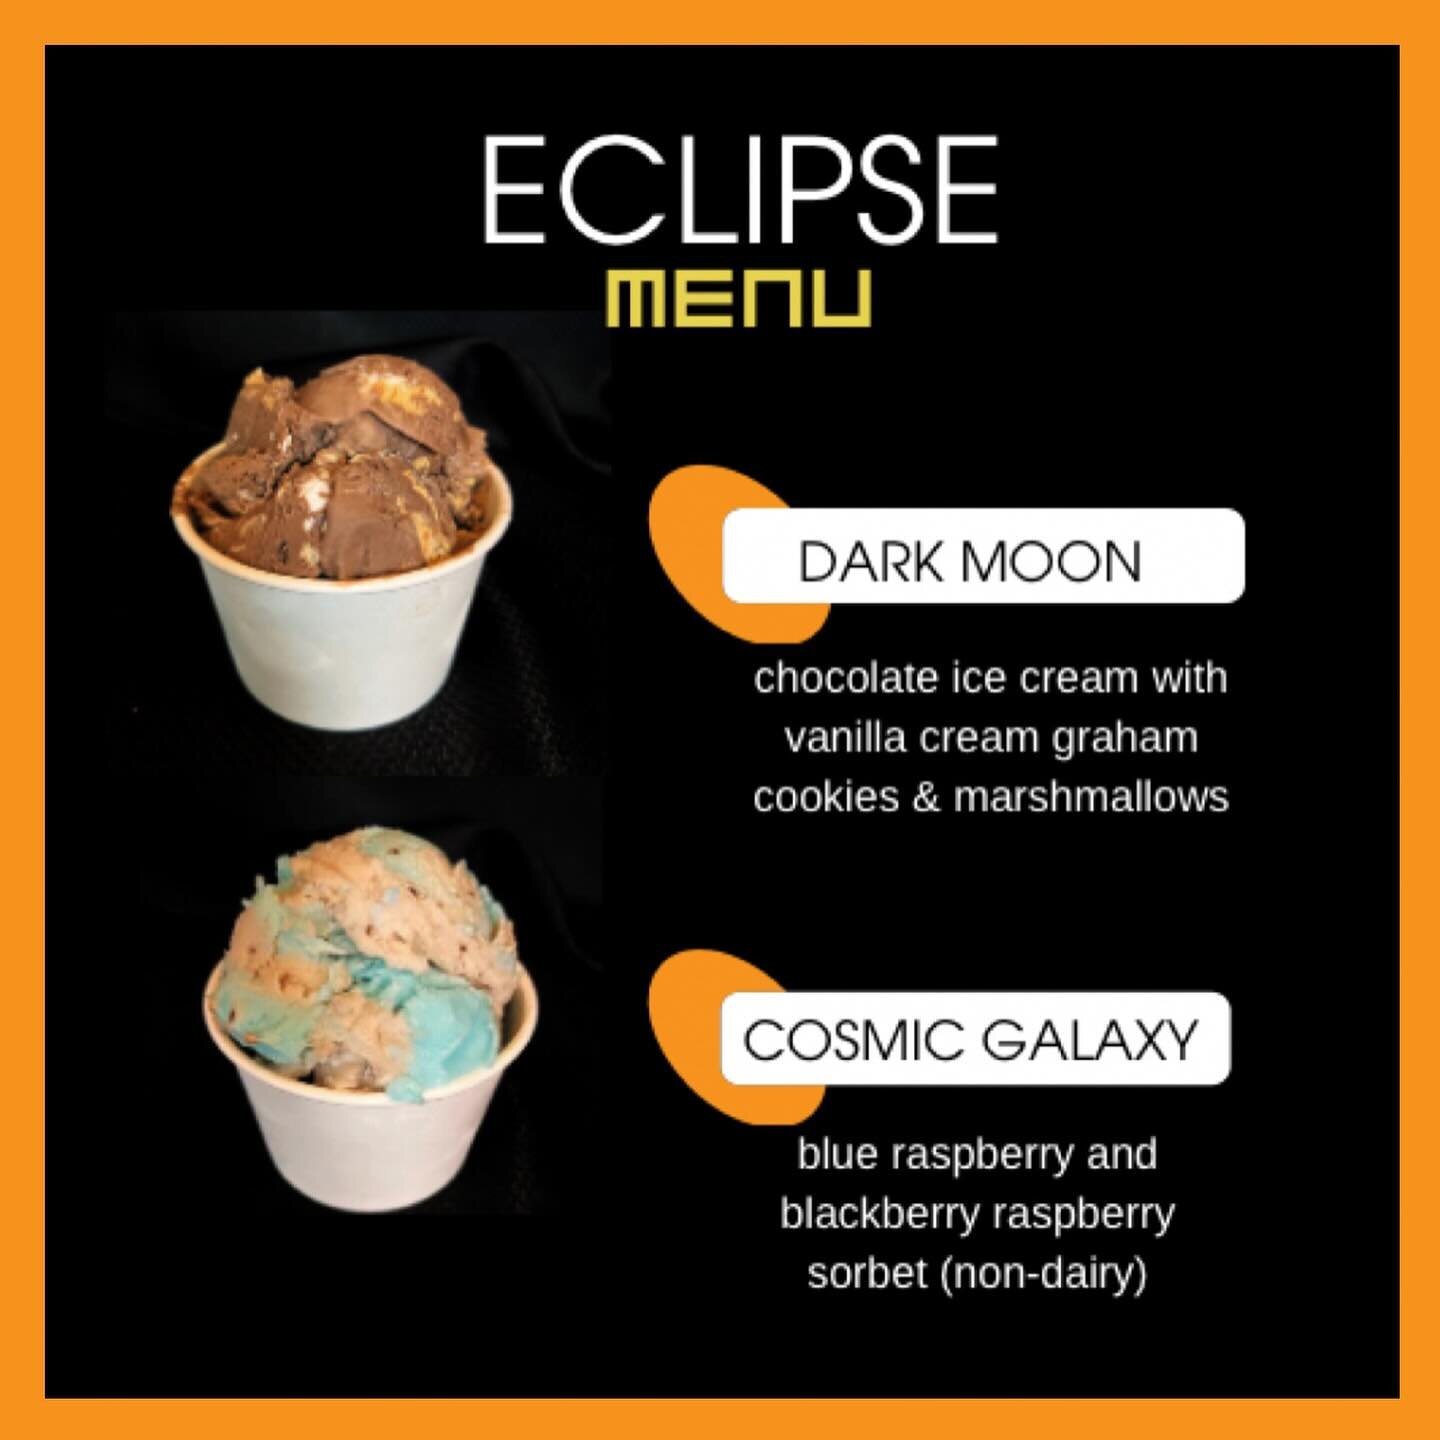 Launch this weekend&rsquo;s festivities with our Eclipse menu! Did you know that we offer Dark Matter ice cream and our Dark Side smoothies all year round?  We&rsquo;re open until 8:30 PM tonight and Saturday 12:00-8:30 PM. 

#solareclipse 
#eclipsem